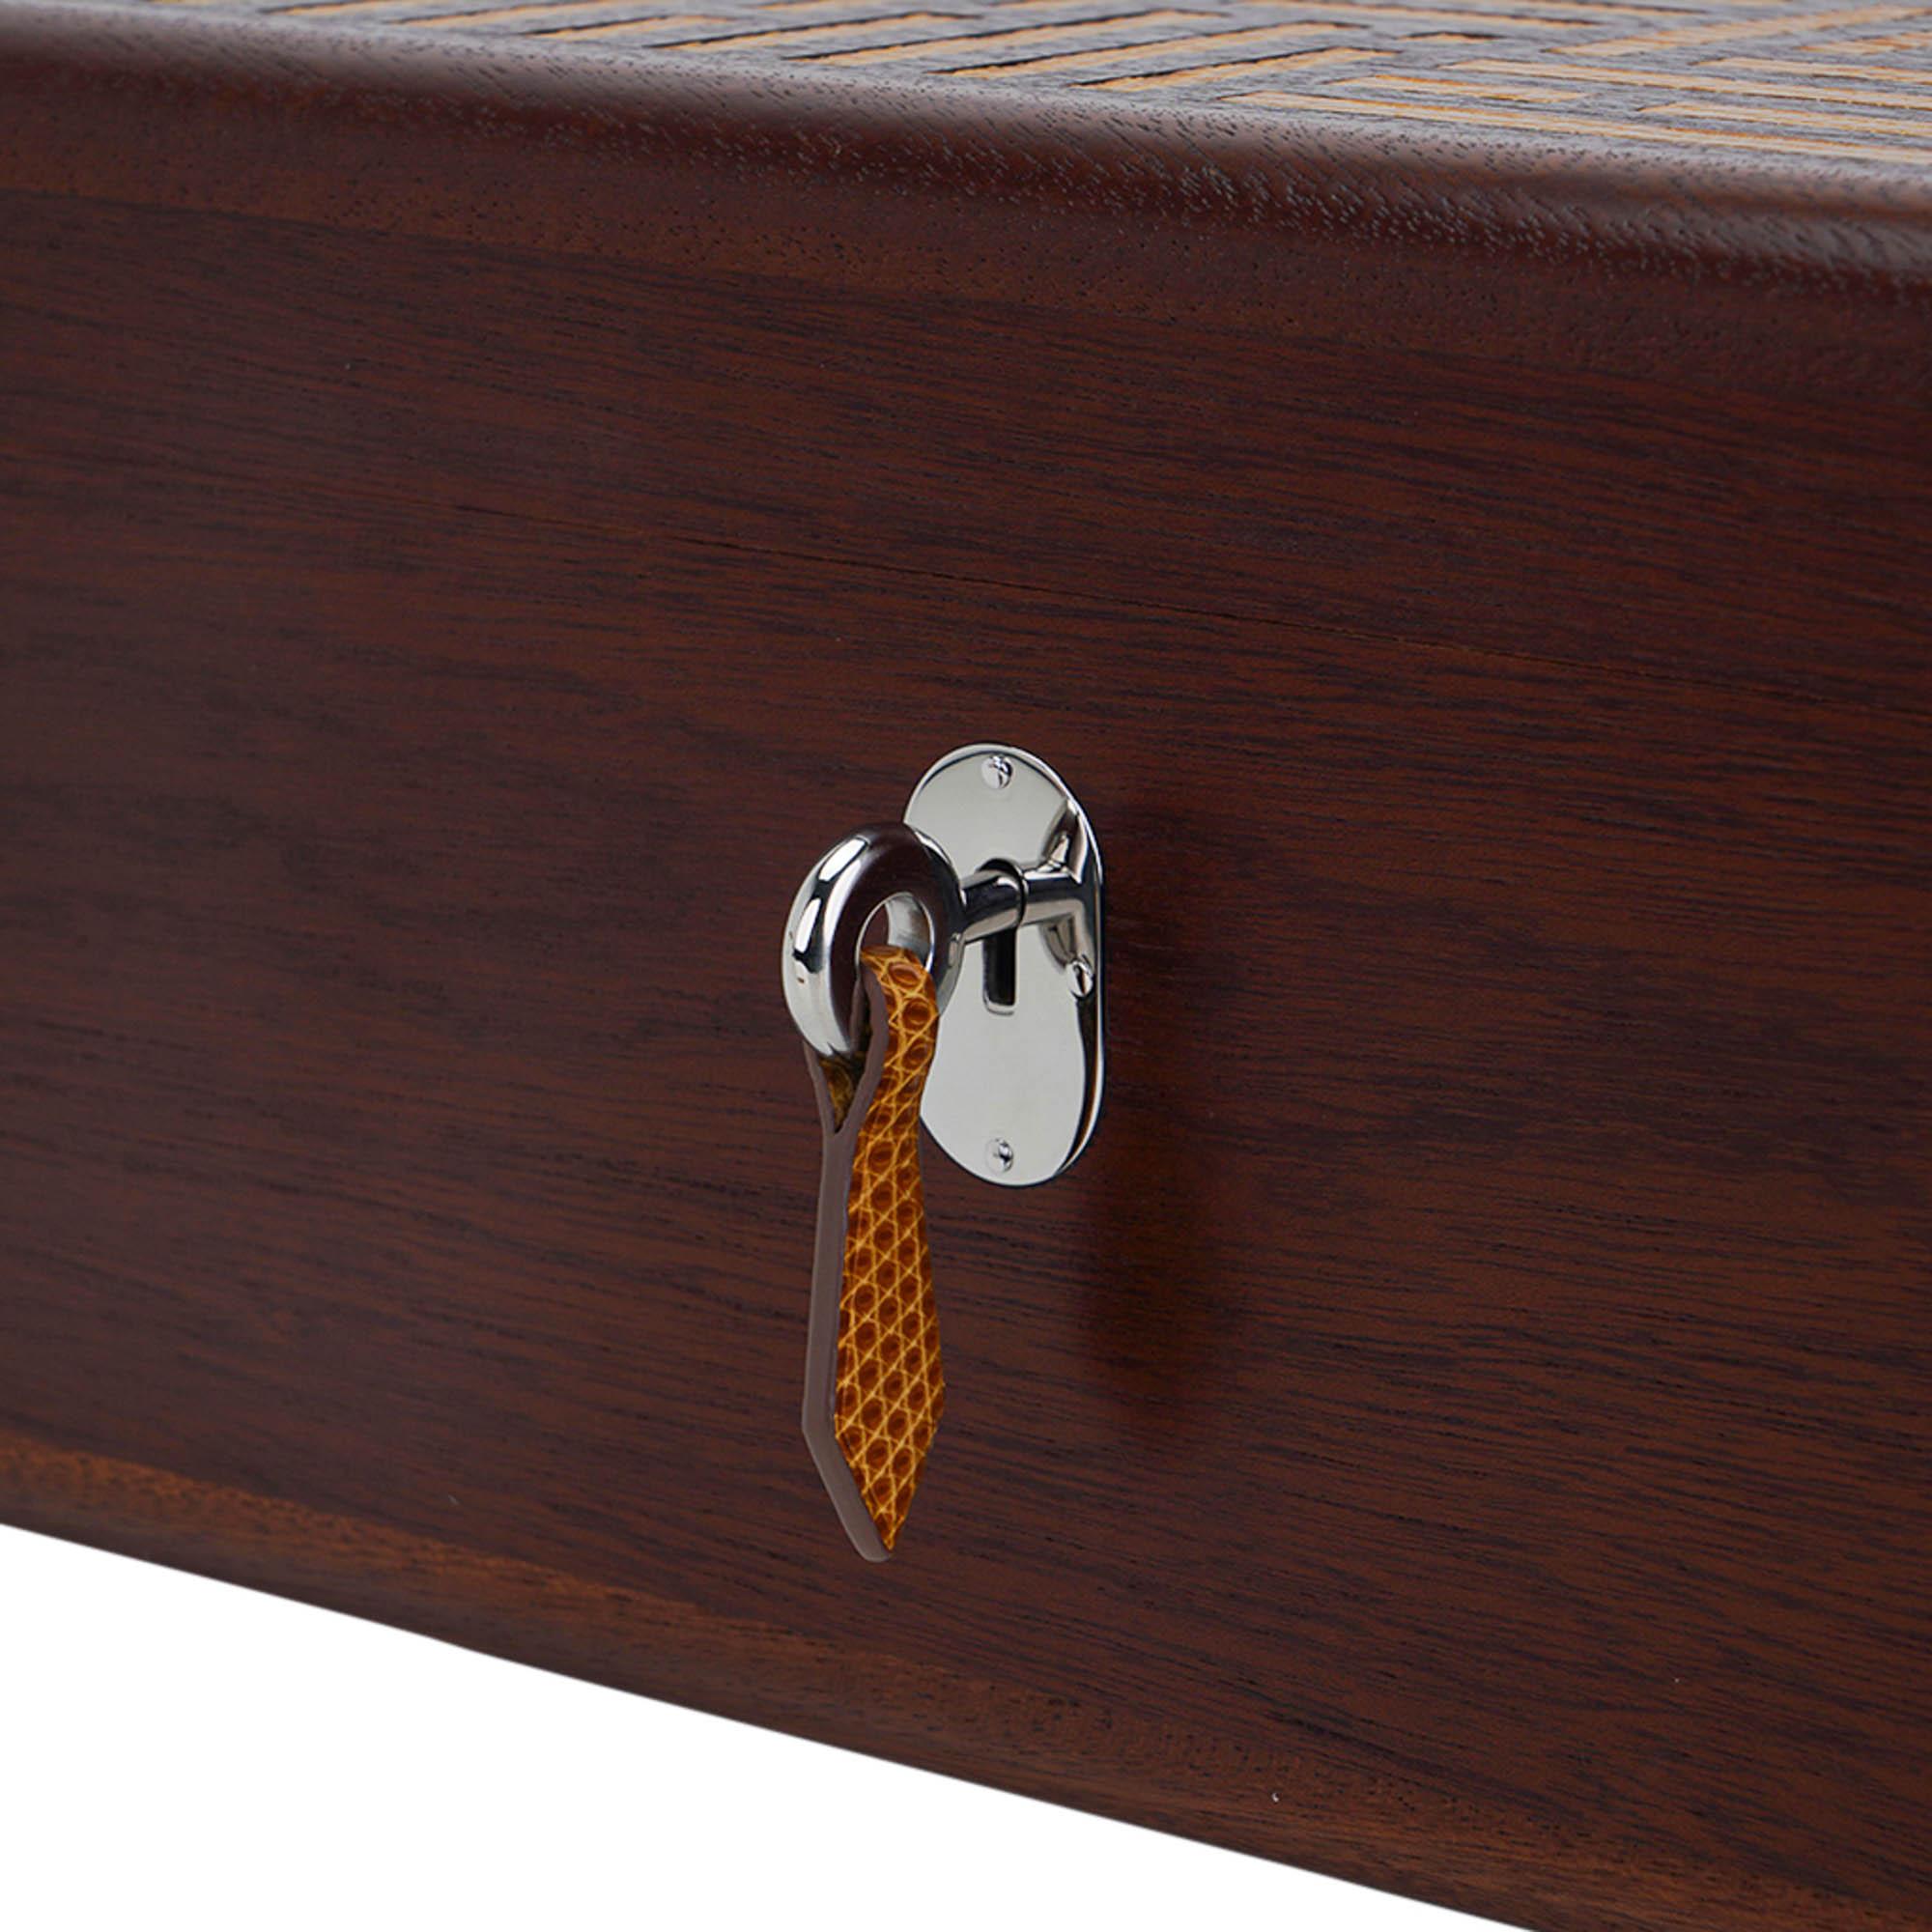 Hermes Coffret a Cigares Humidor Limited Edition Sycamore Holz Sesam Eidechse im Angebot 12